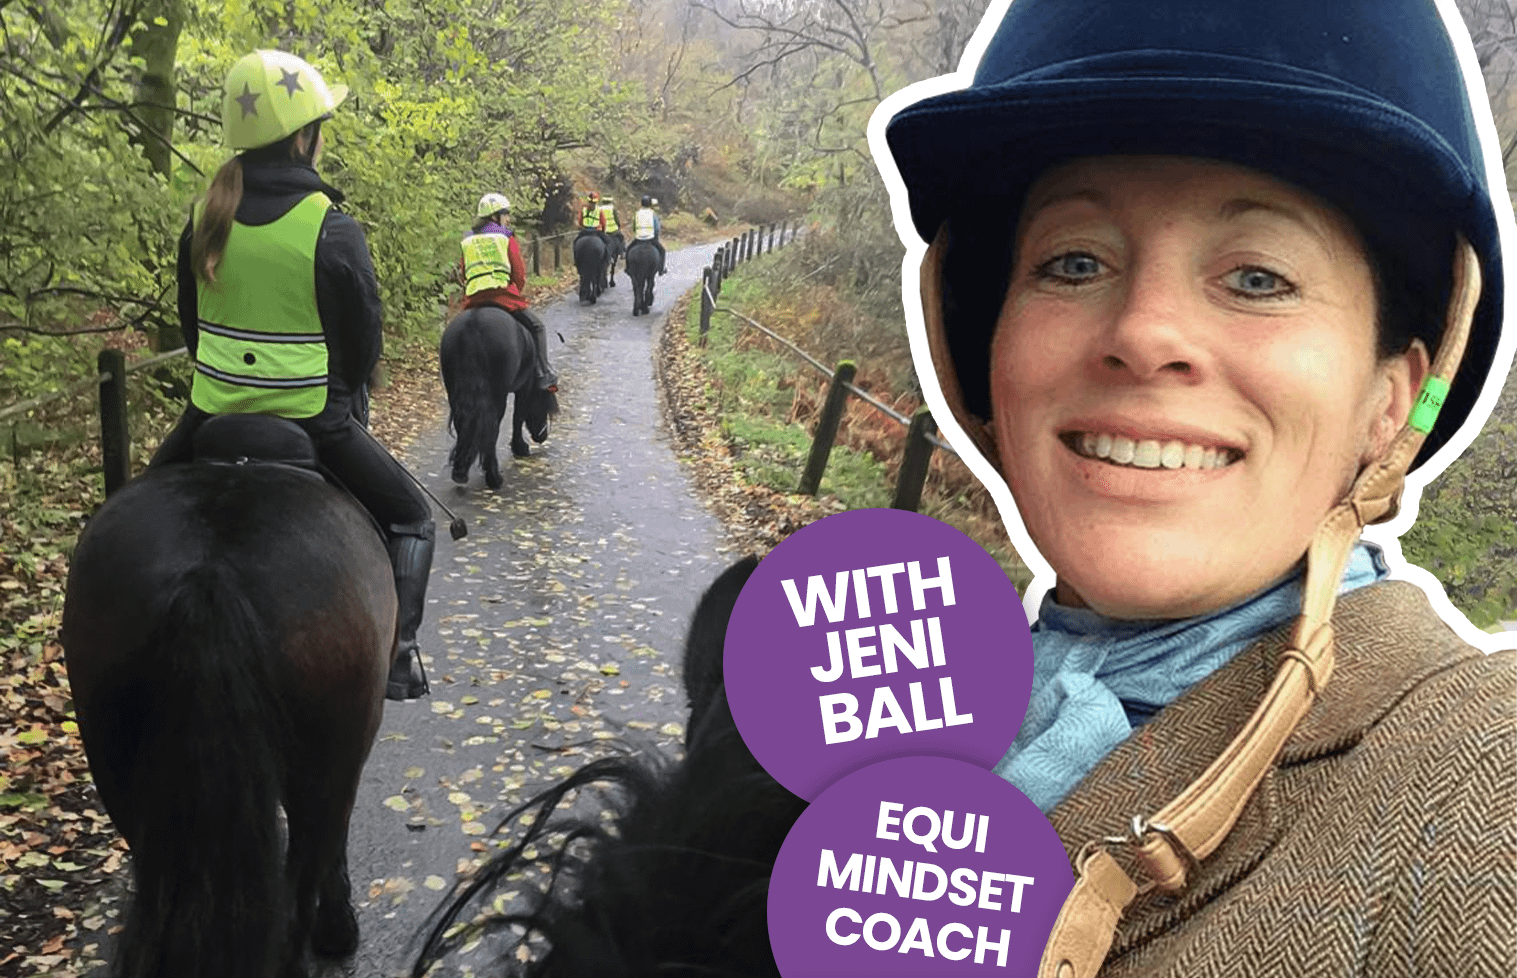 Hacking with confidence - Jeni Ball tells us how.